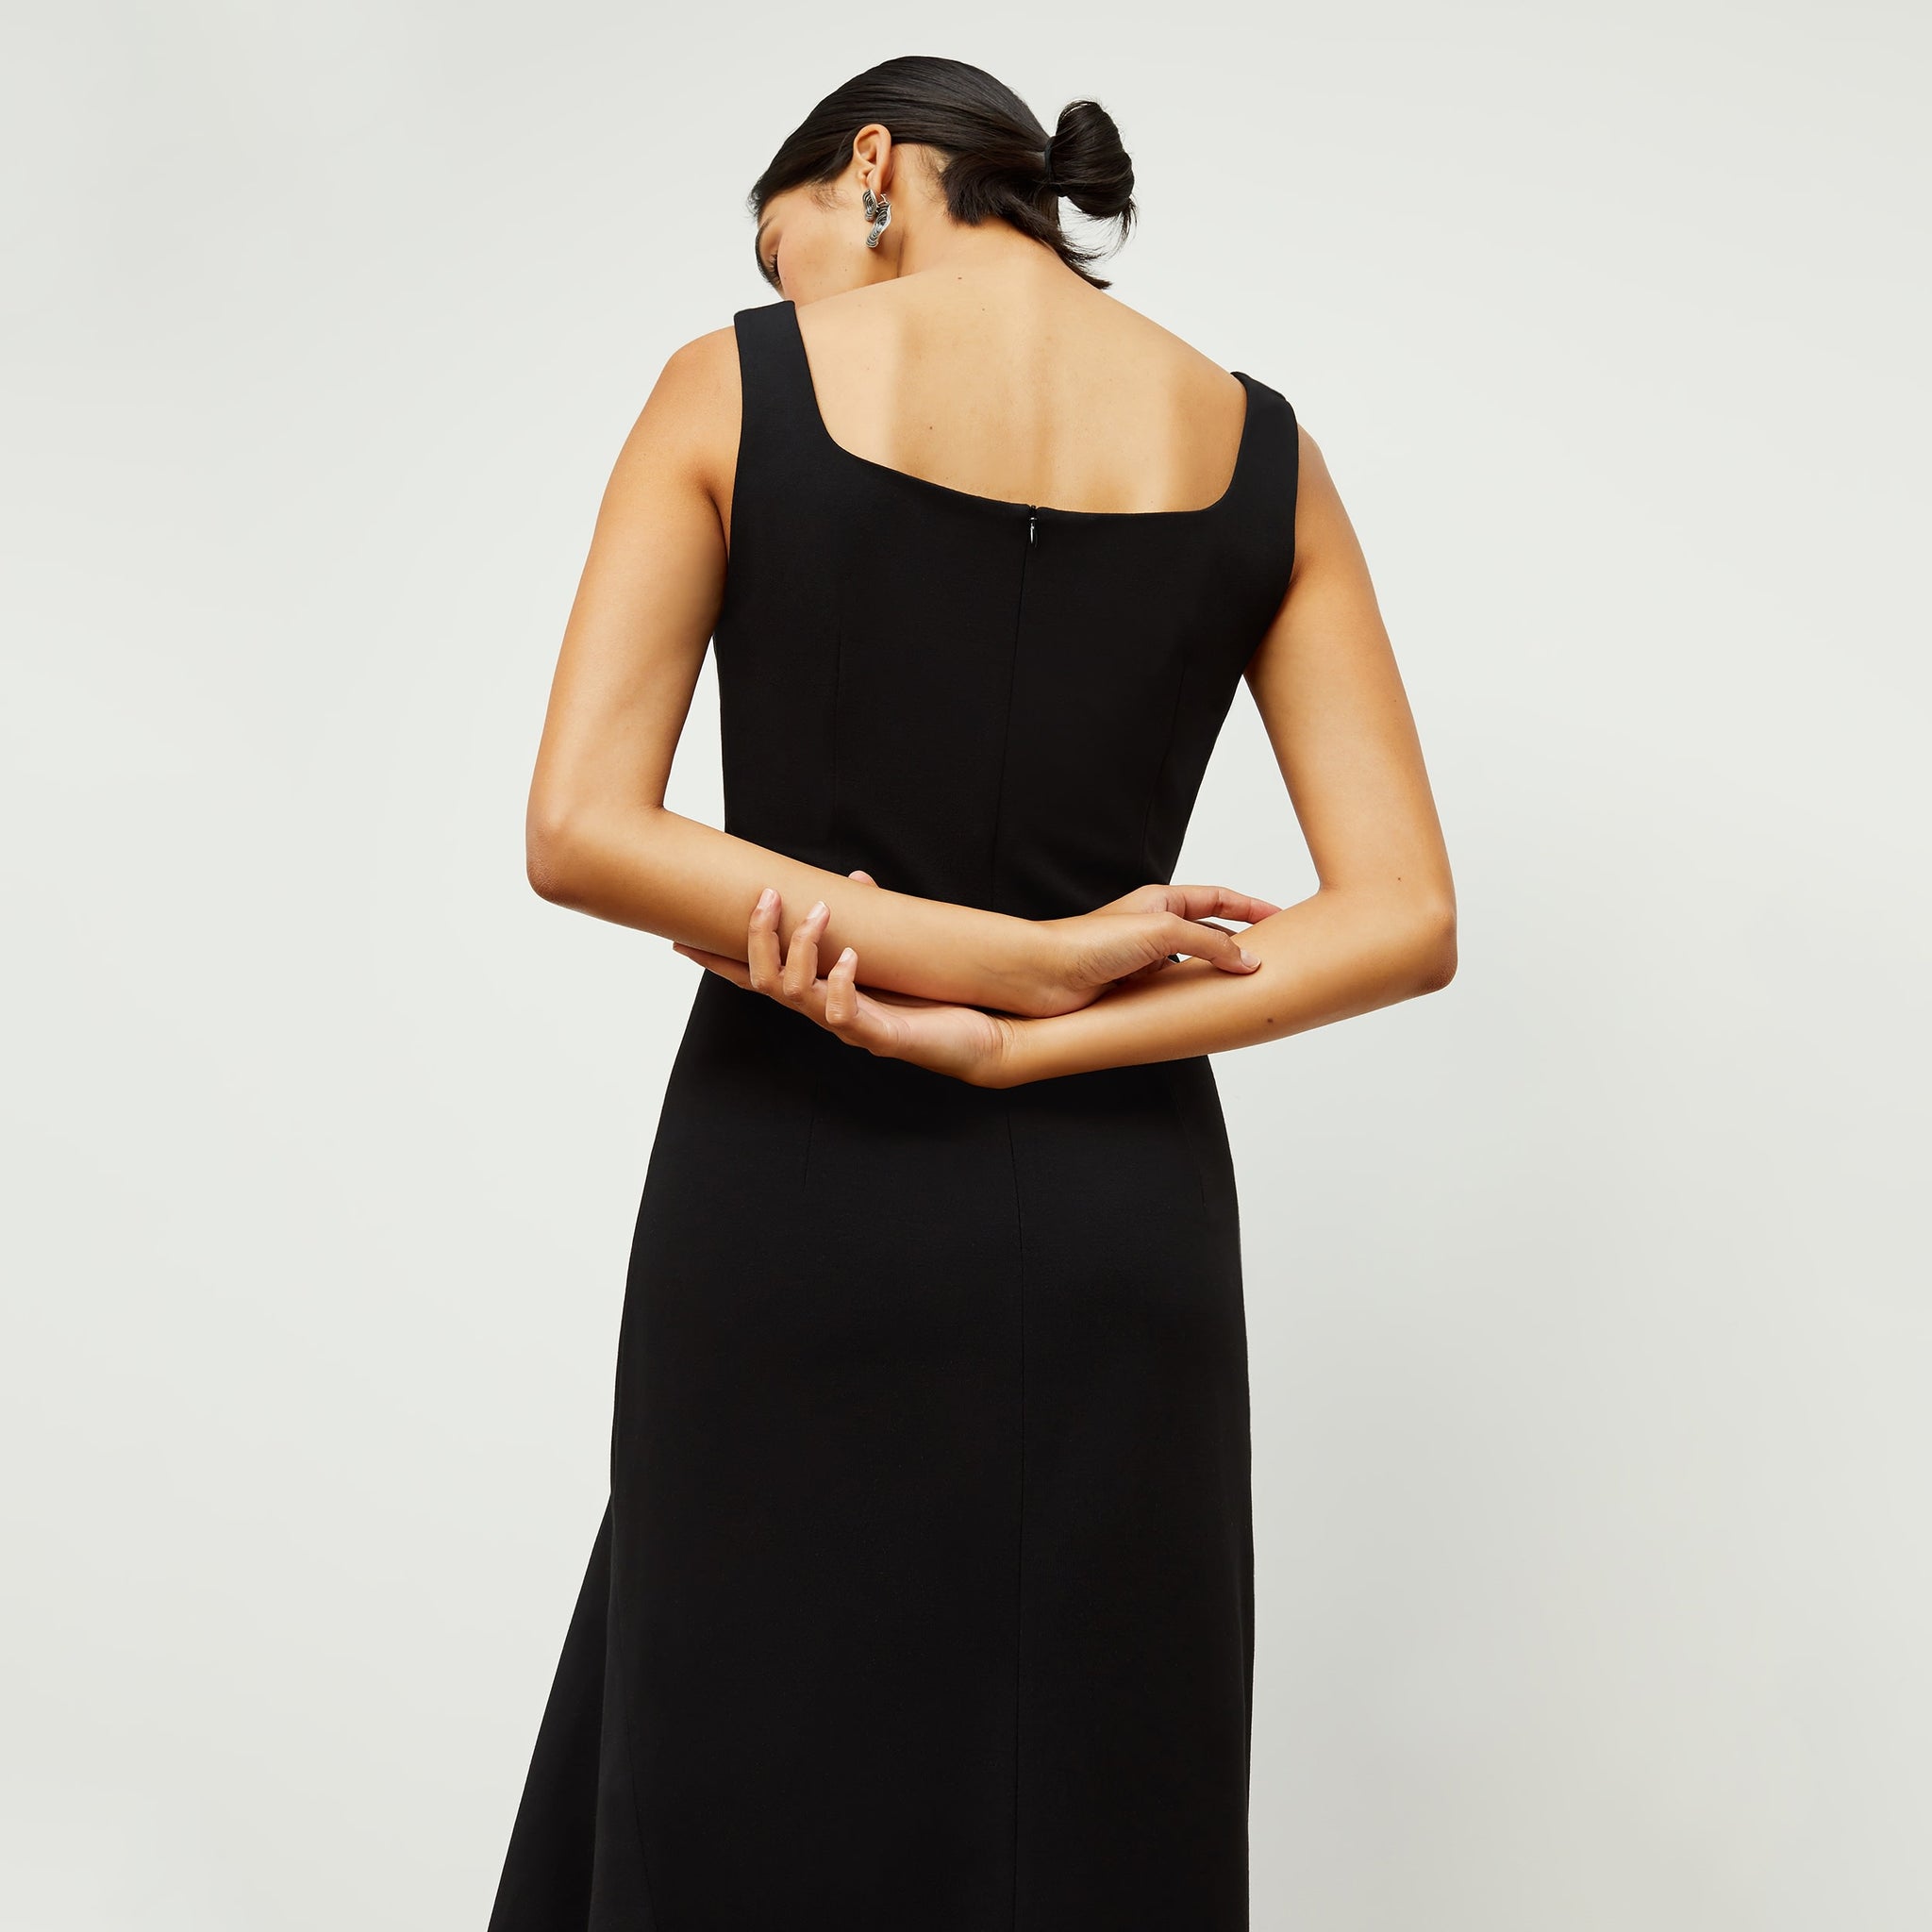 Back image of a woman standing wearing the james dress in black